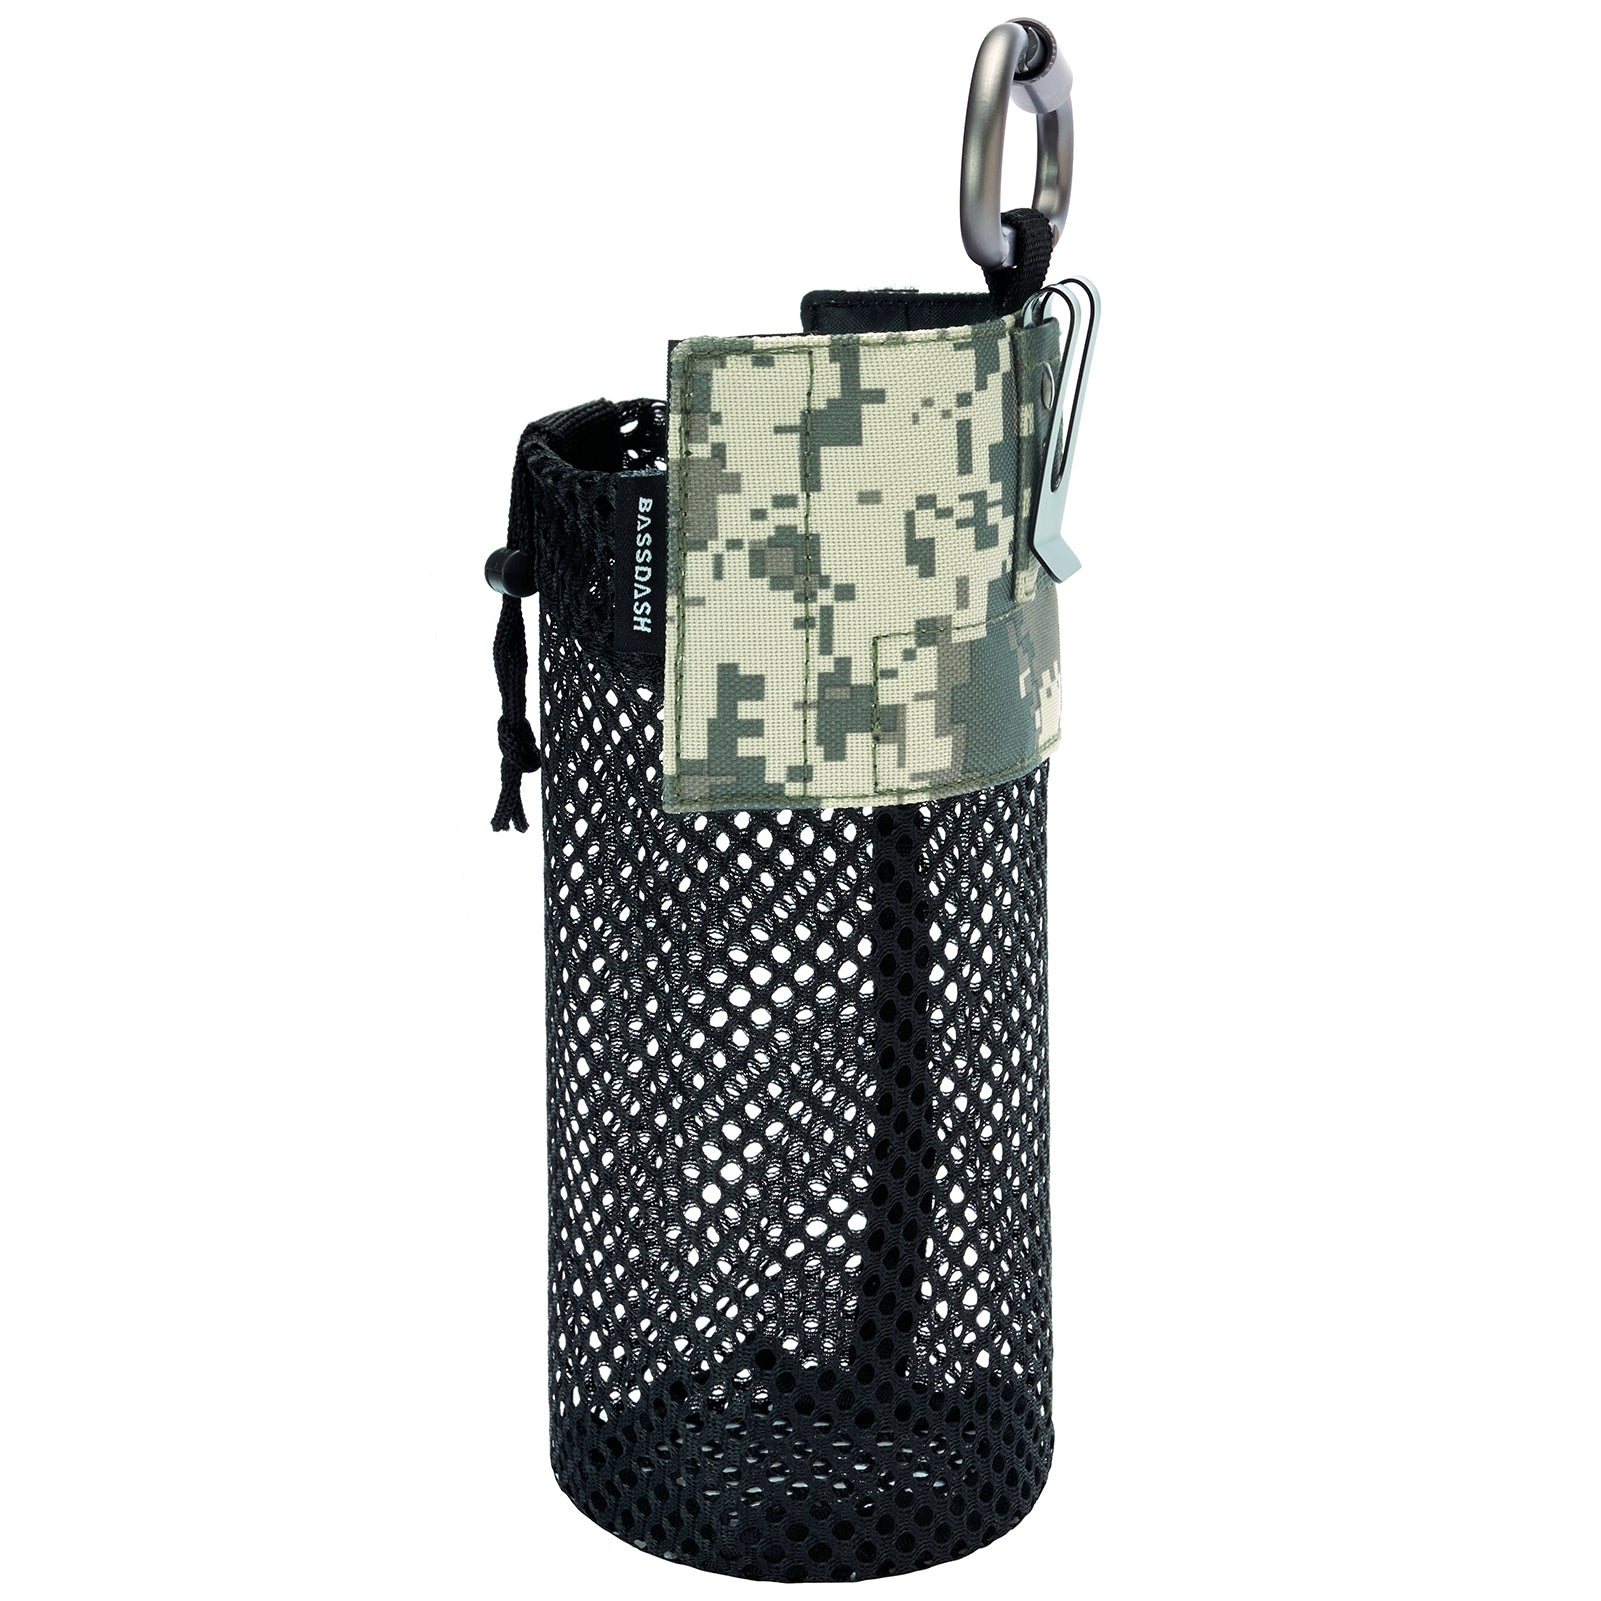 Bassdash Tactical Molle Water Bottle Pouch with Carabiner Foldable